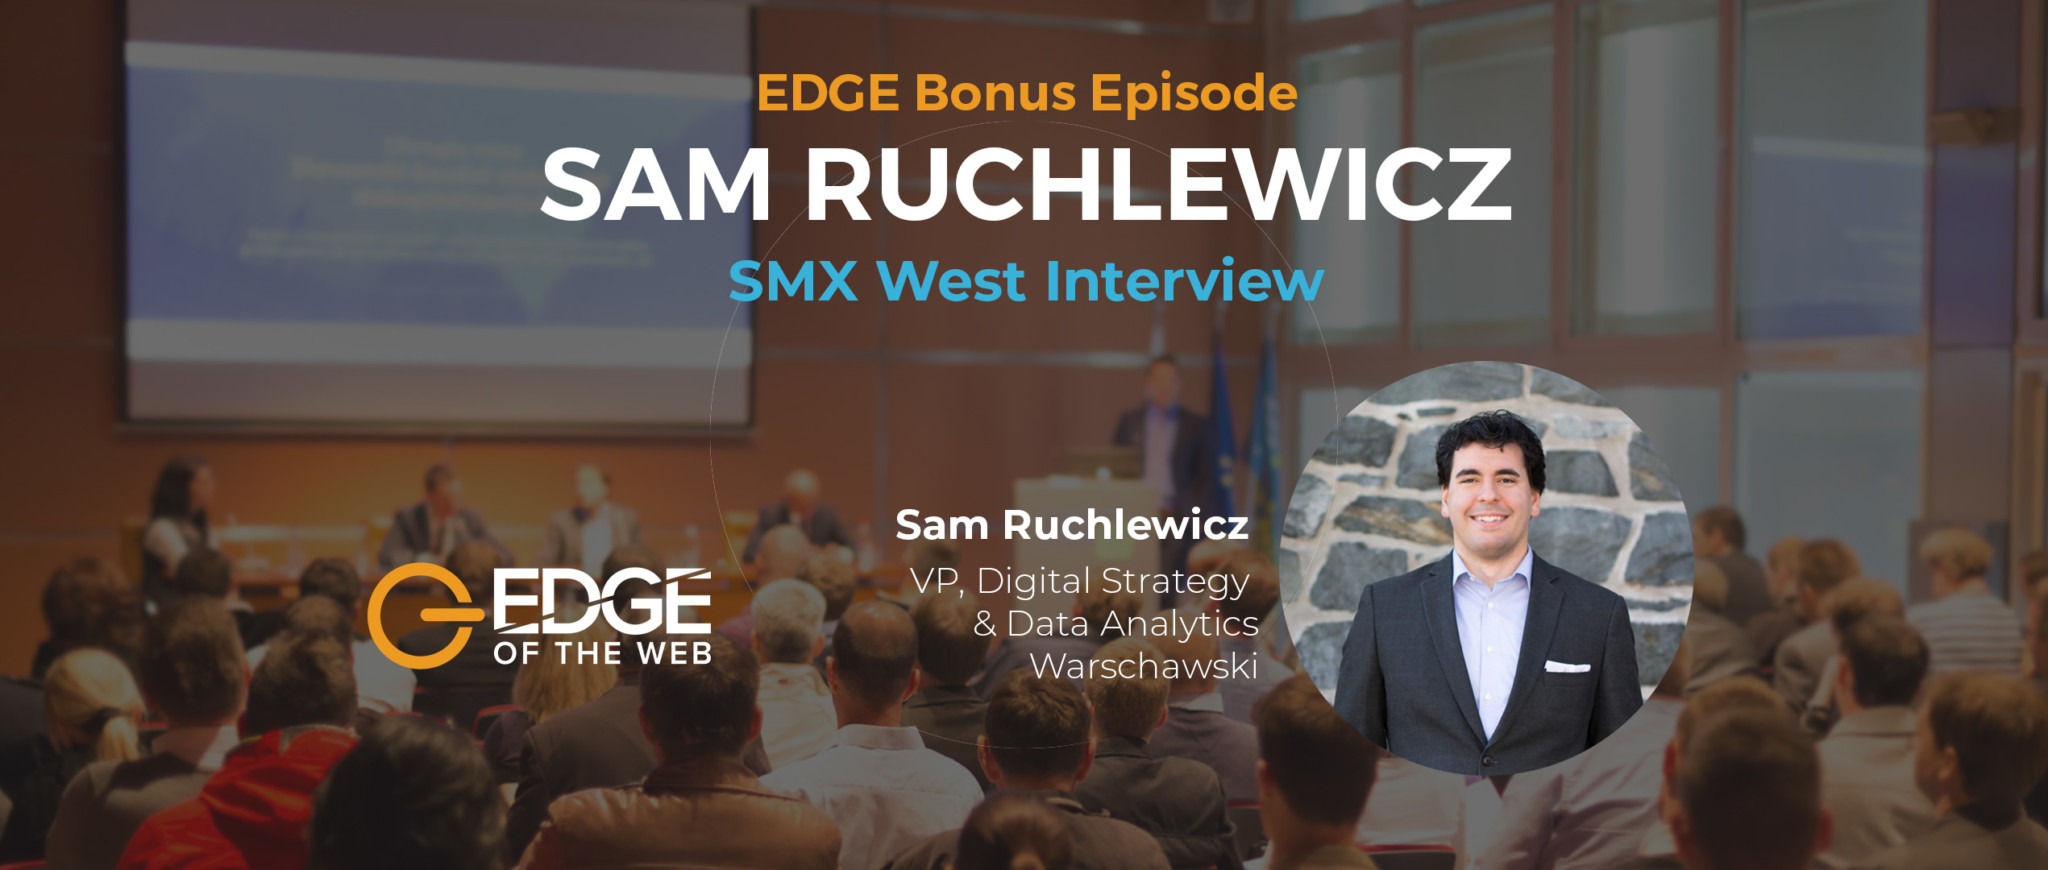 EDGE at SMX West with Sam Ruchlewicz